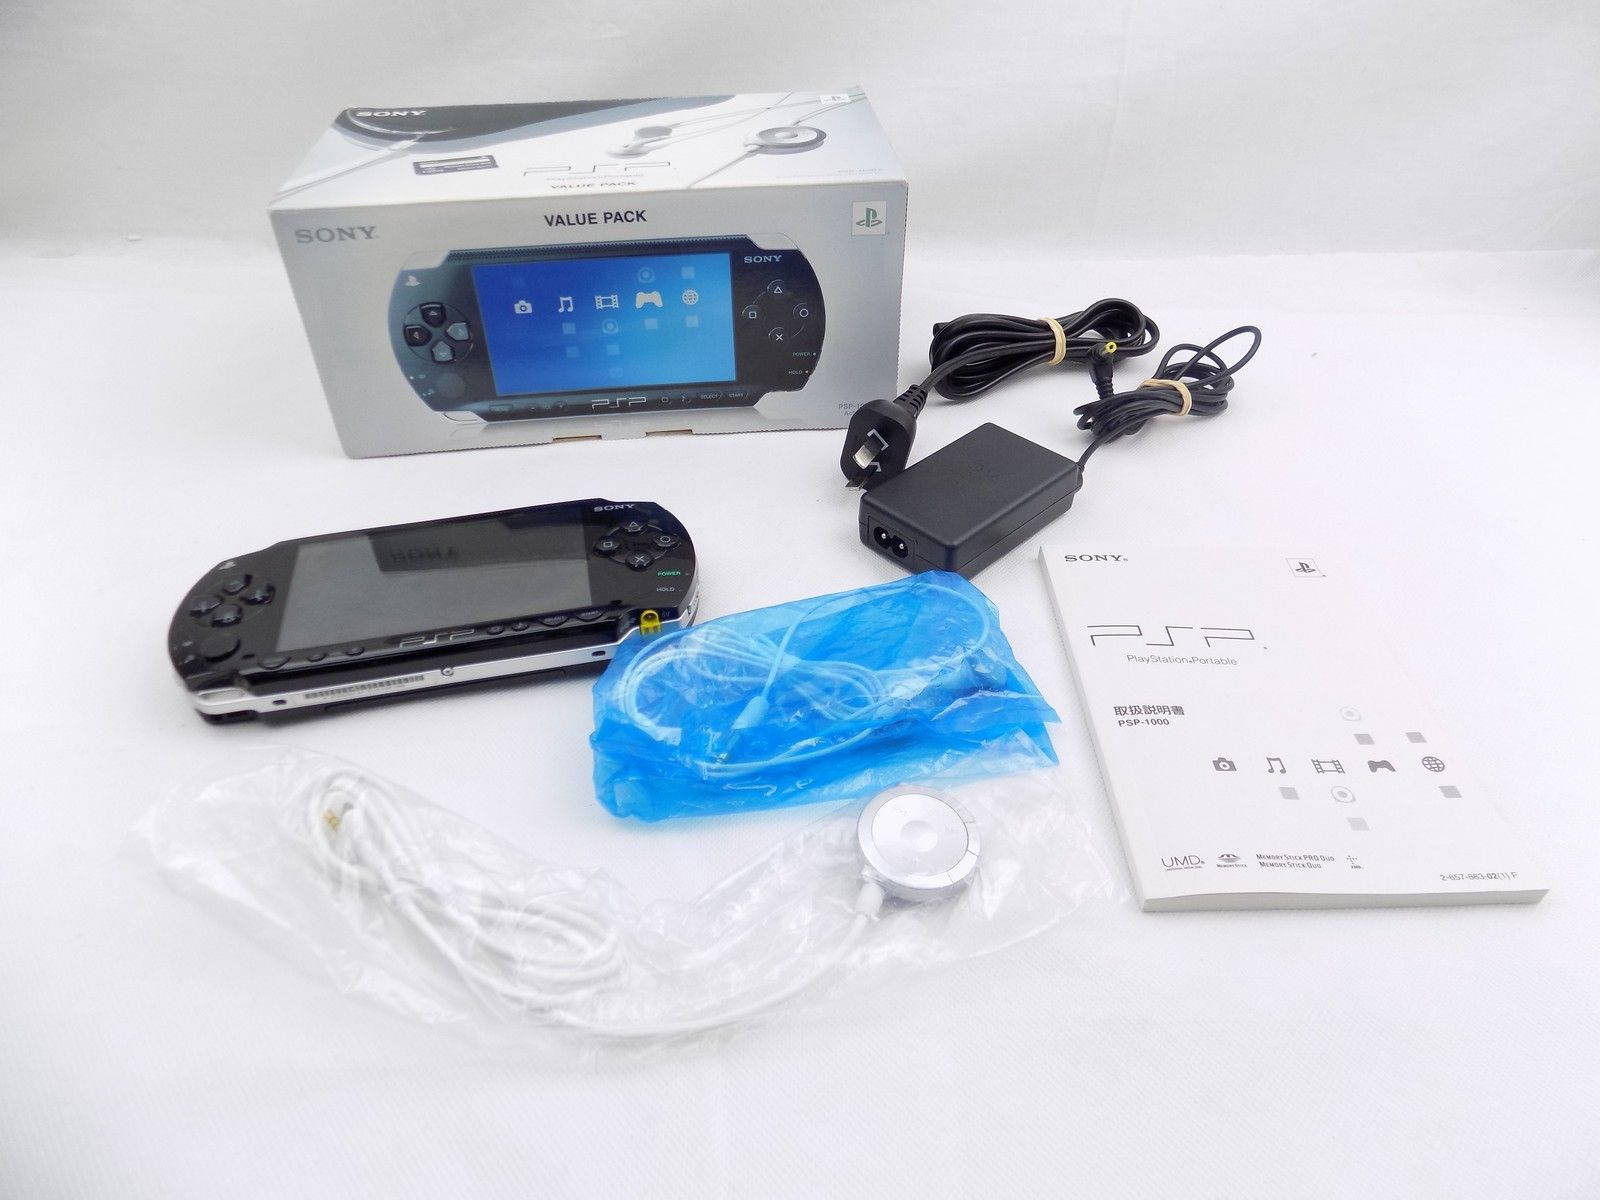 Boxed Value Pack Sony Playstation Portable PSP 1000K (Black) Console  Handheld